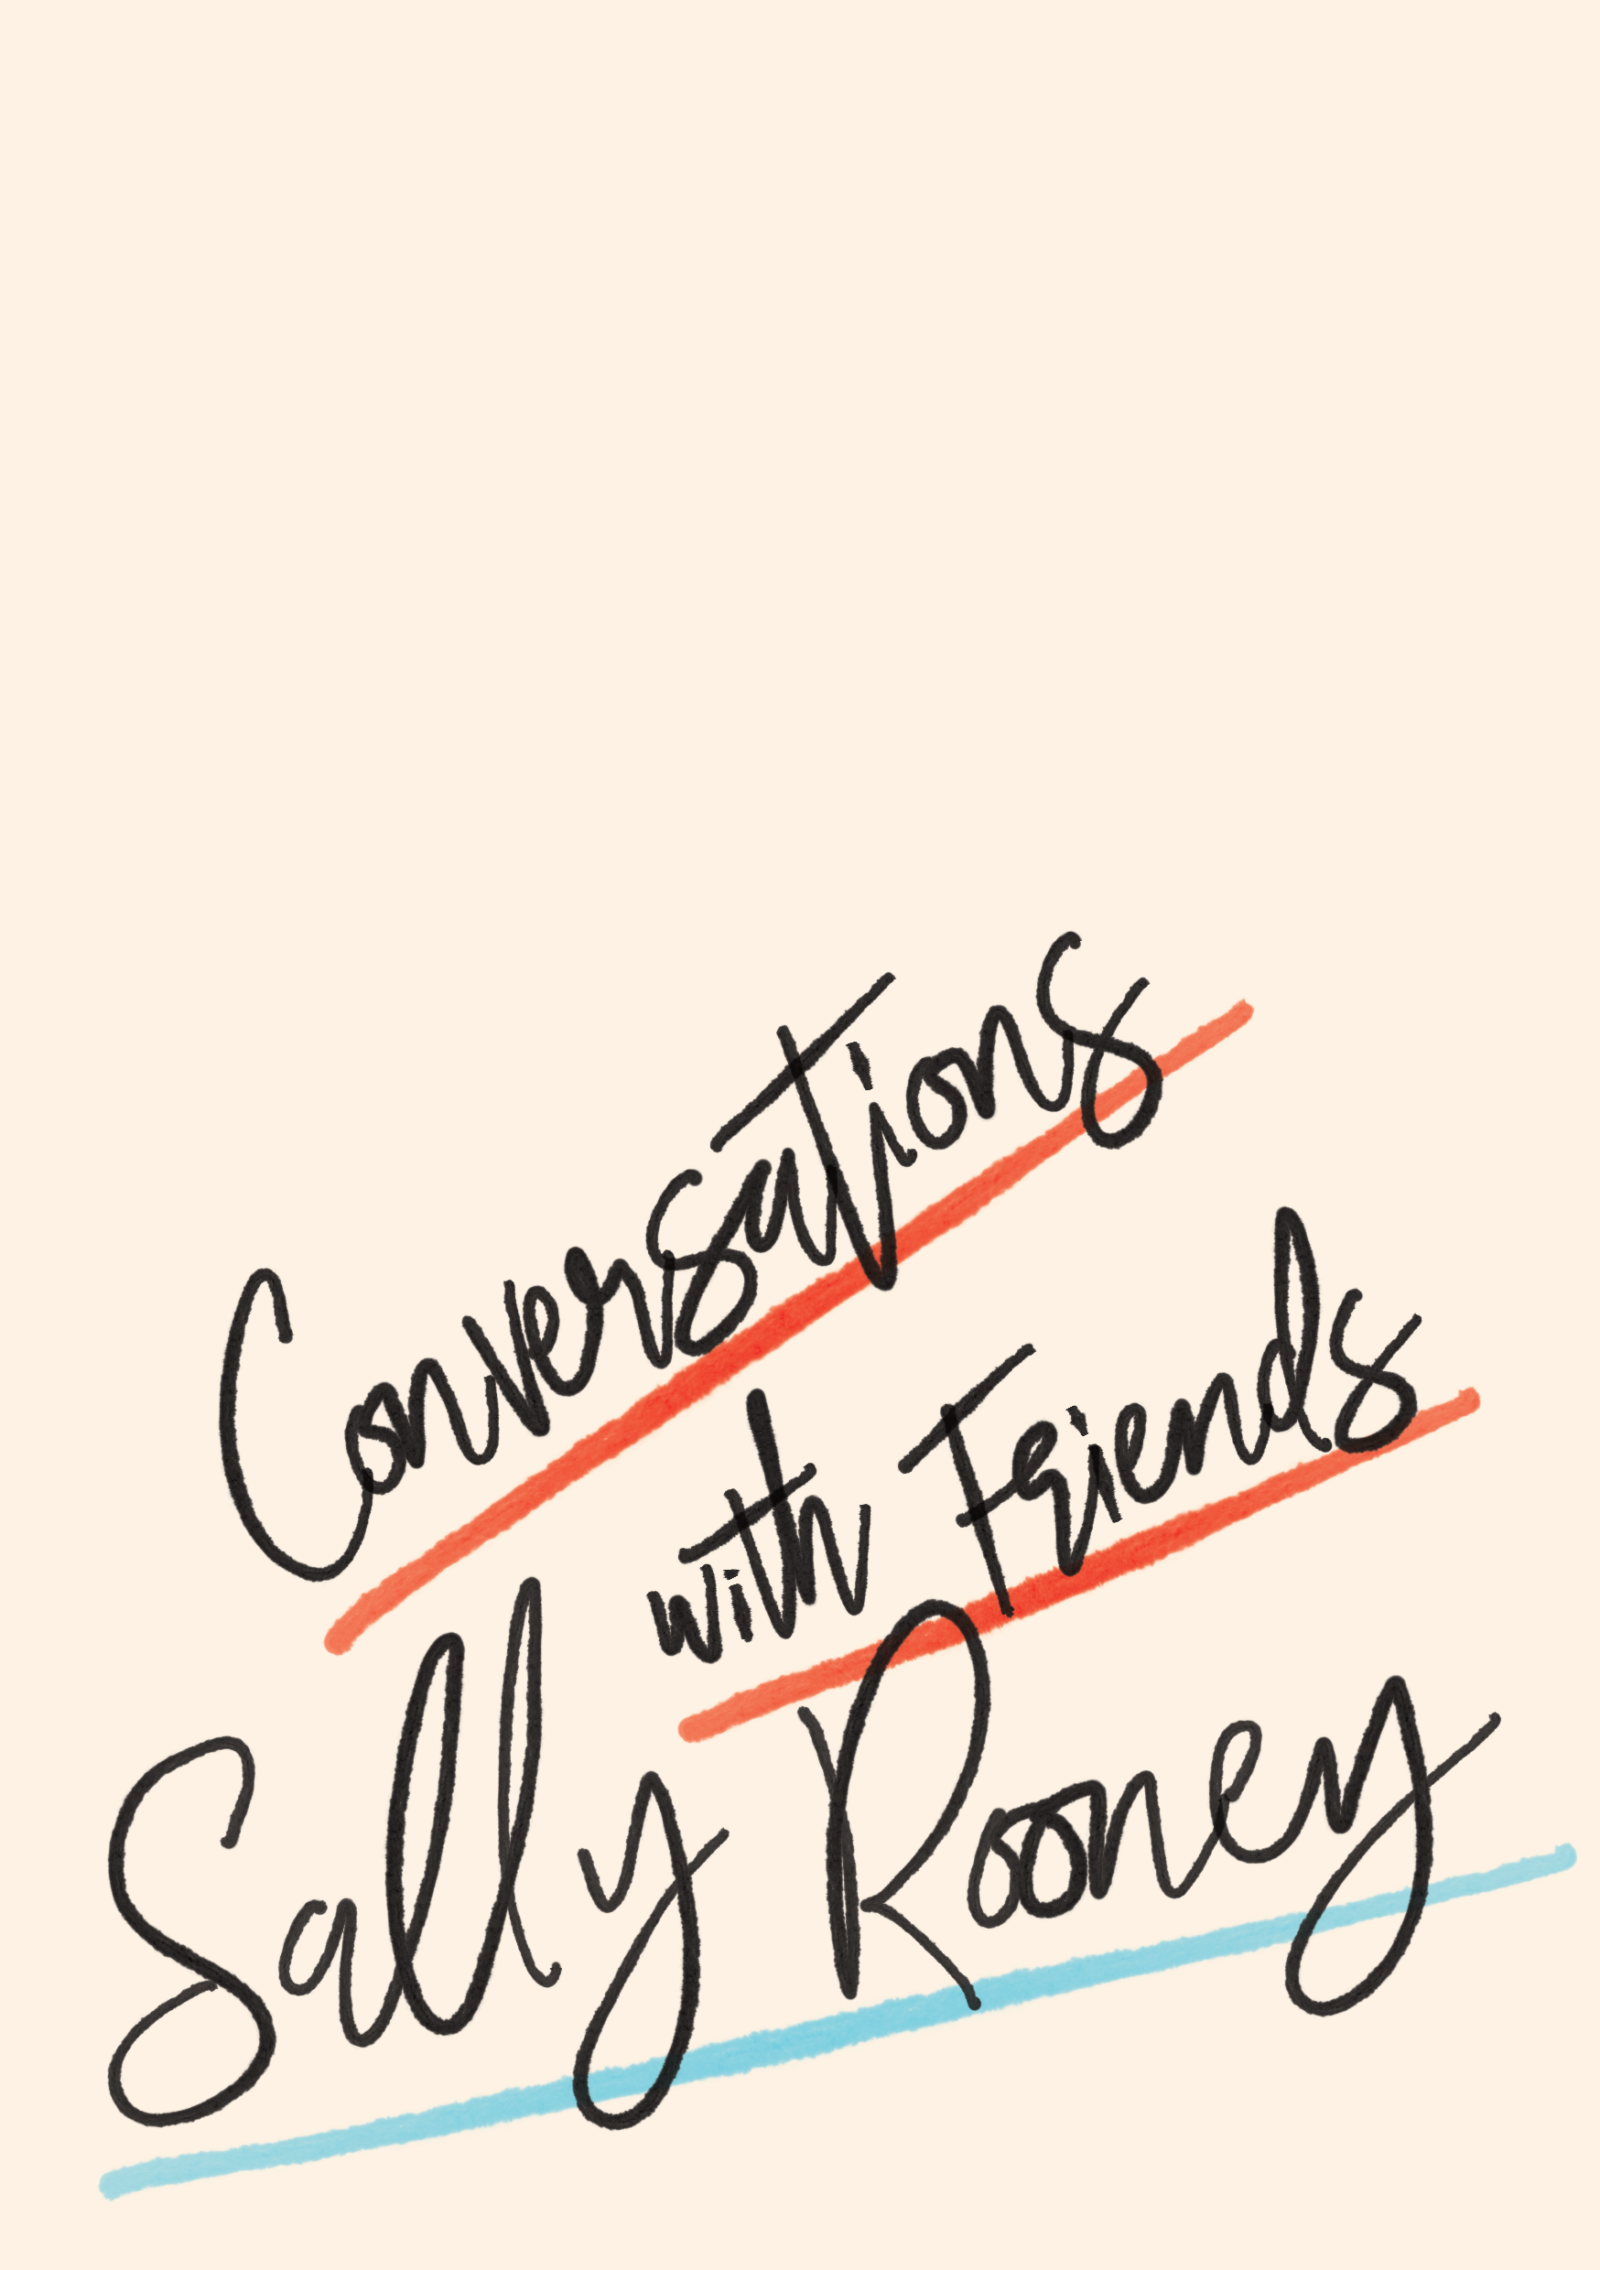 conversations with friends book review